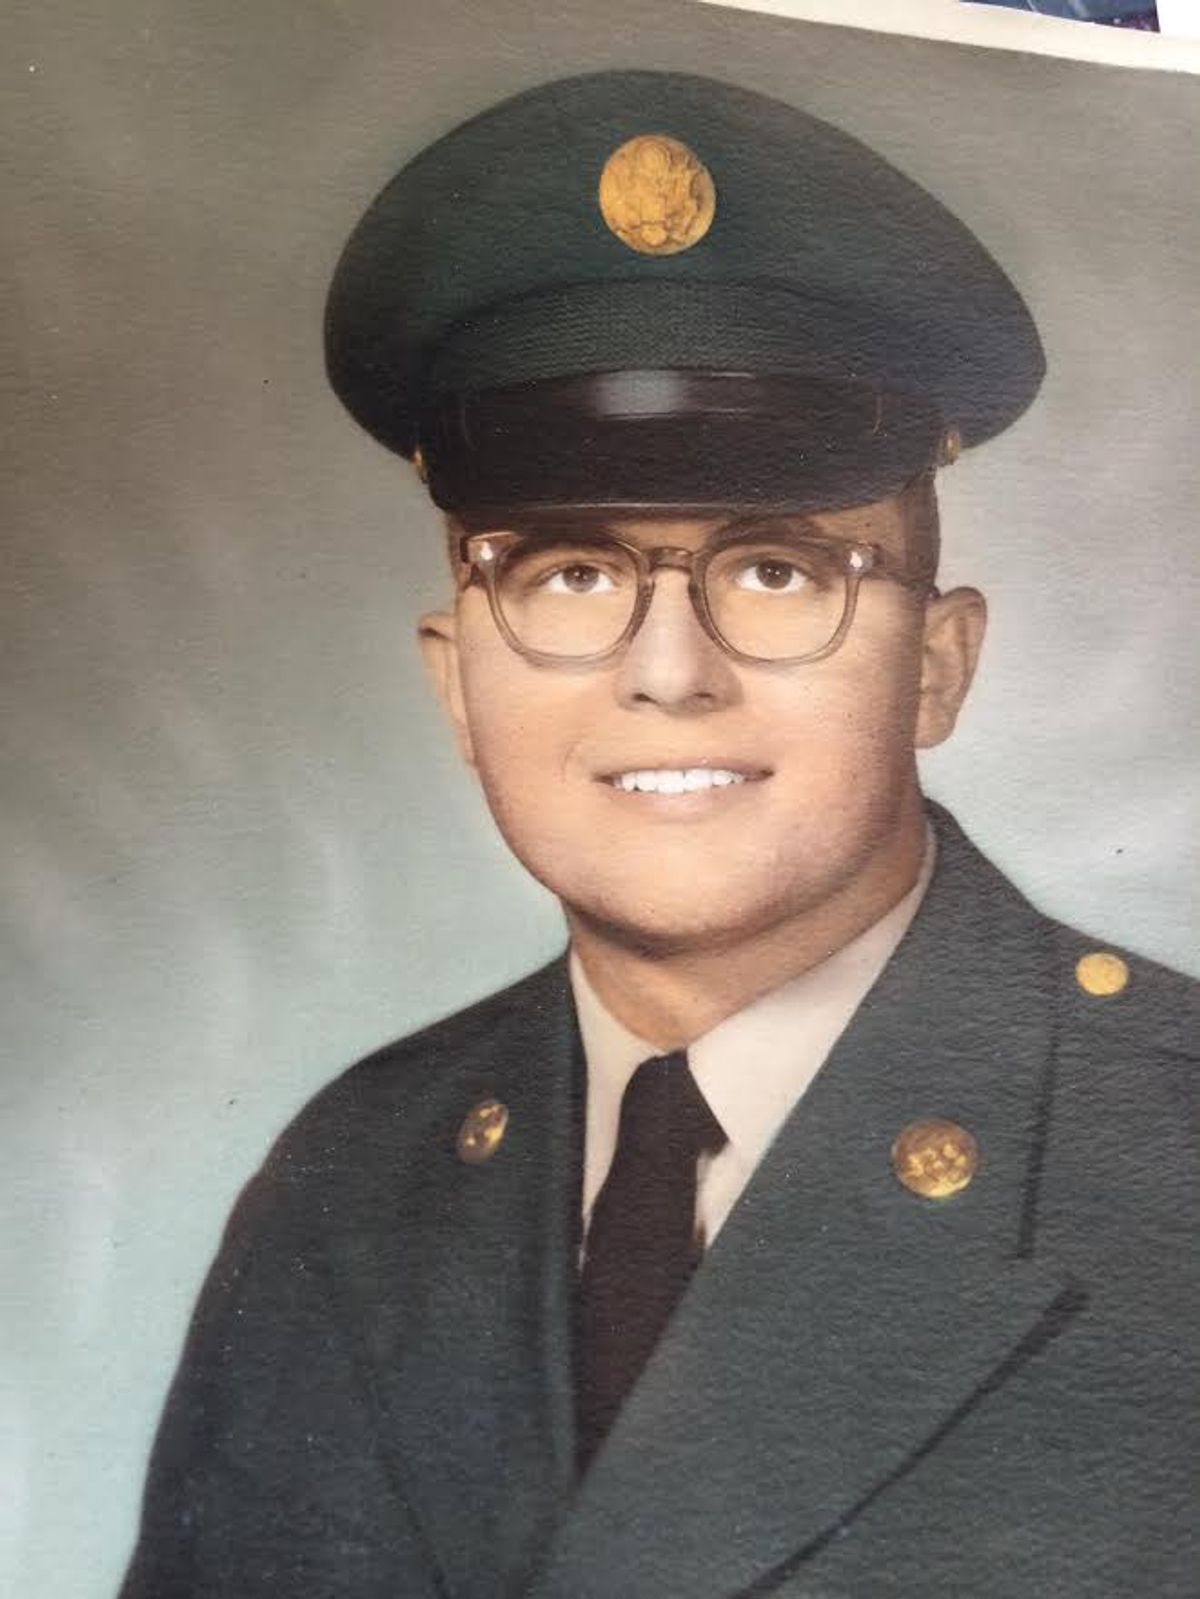 A 19-Year-Old Off to War: My Father, The Vietnam Veteran